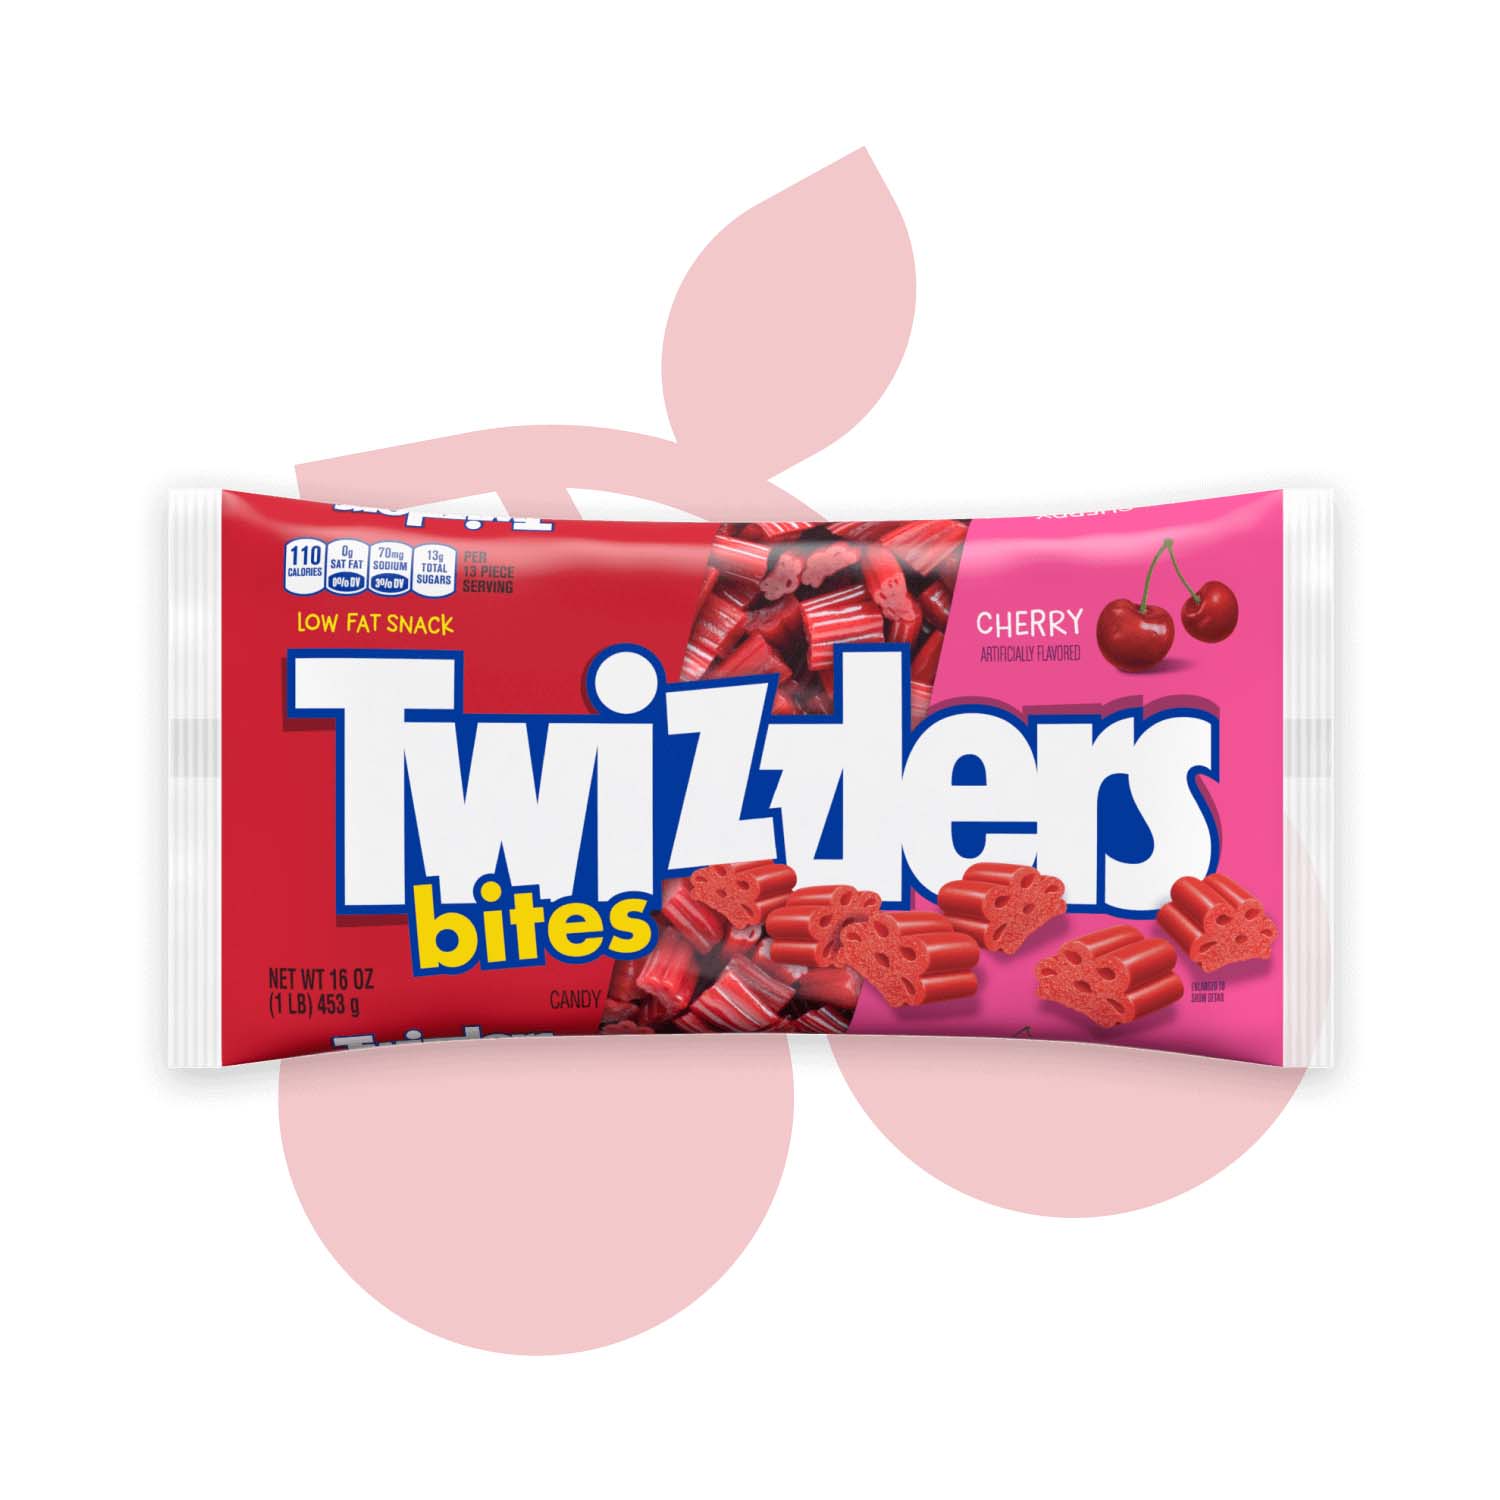 bag of twizzlers bites cherry flavored candy